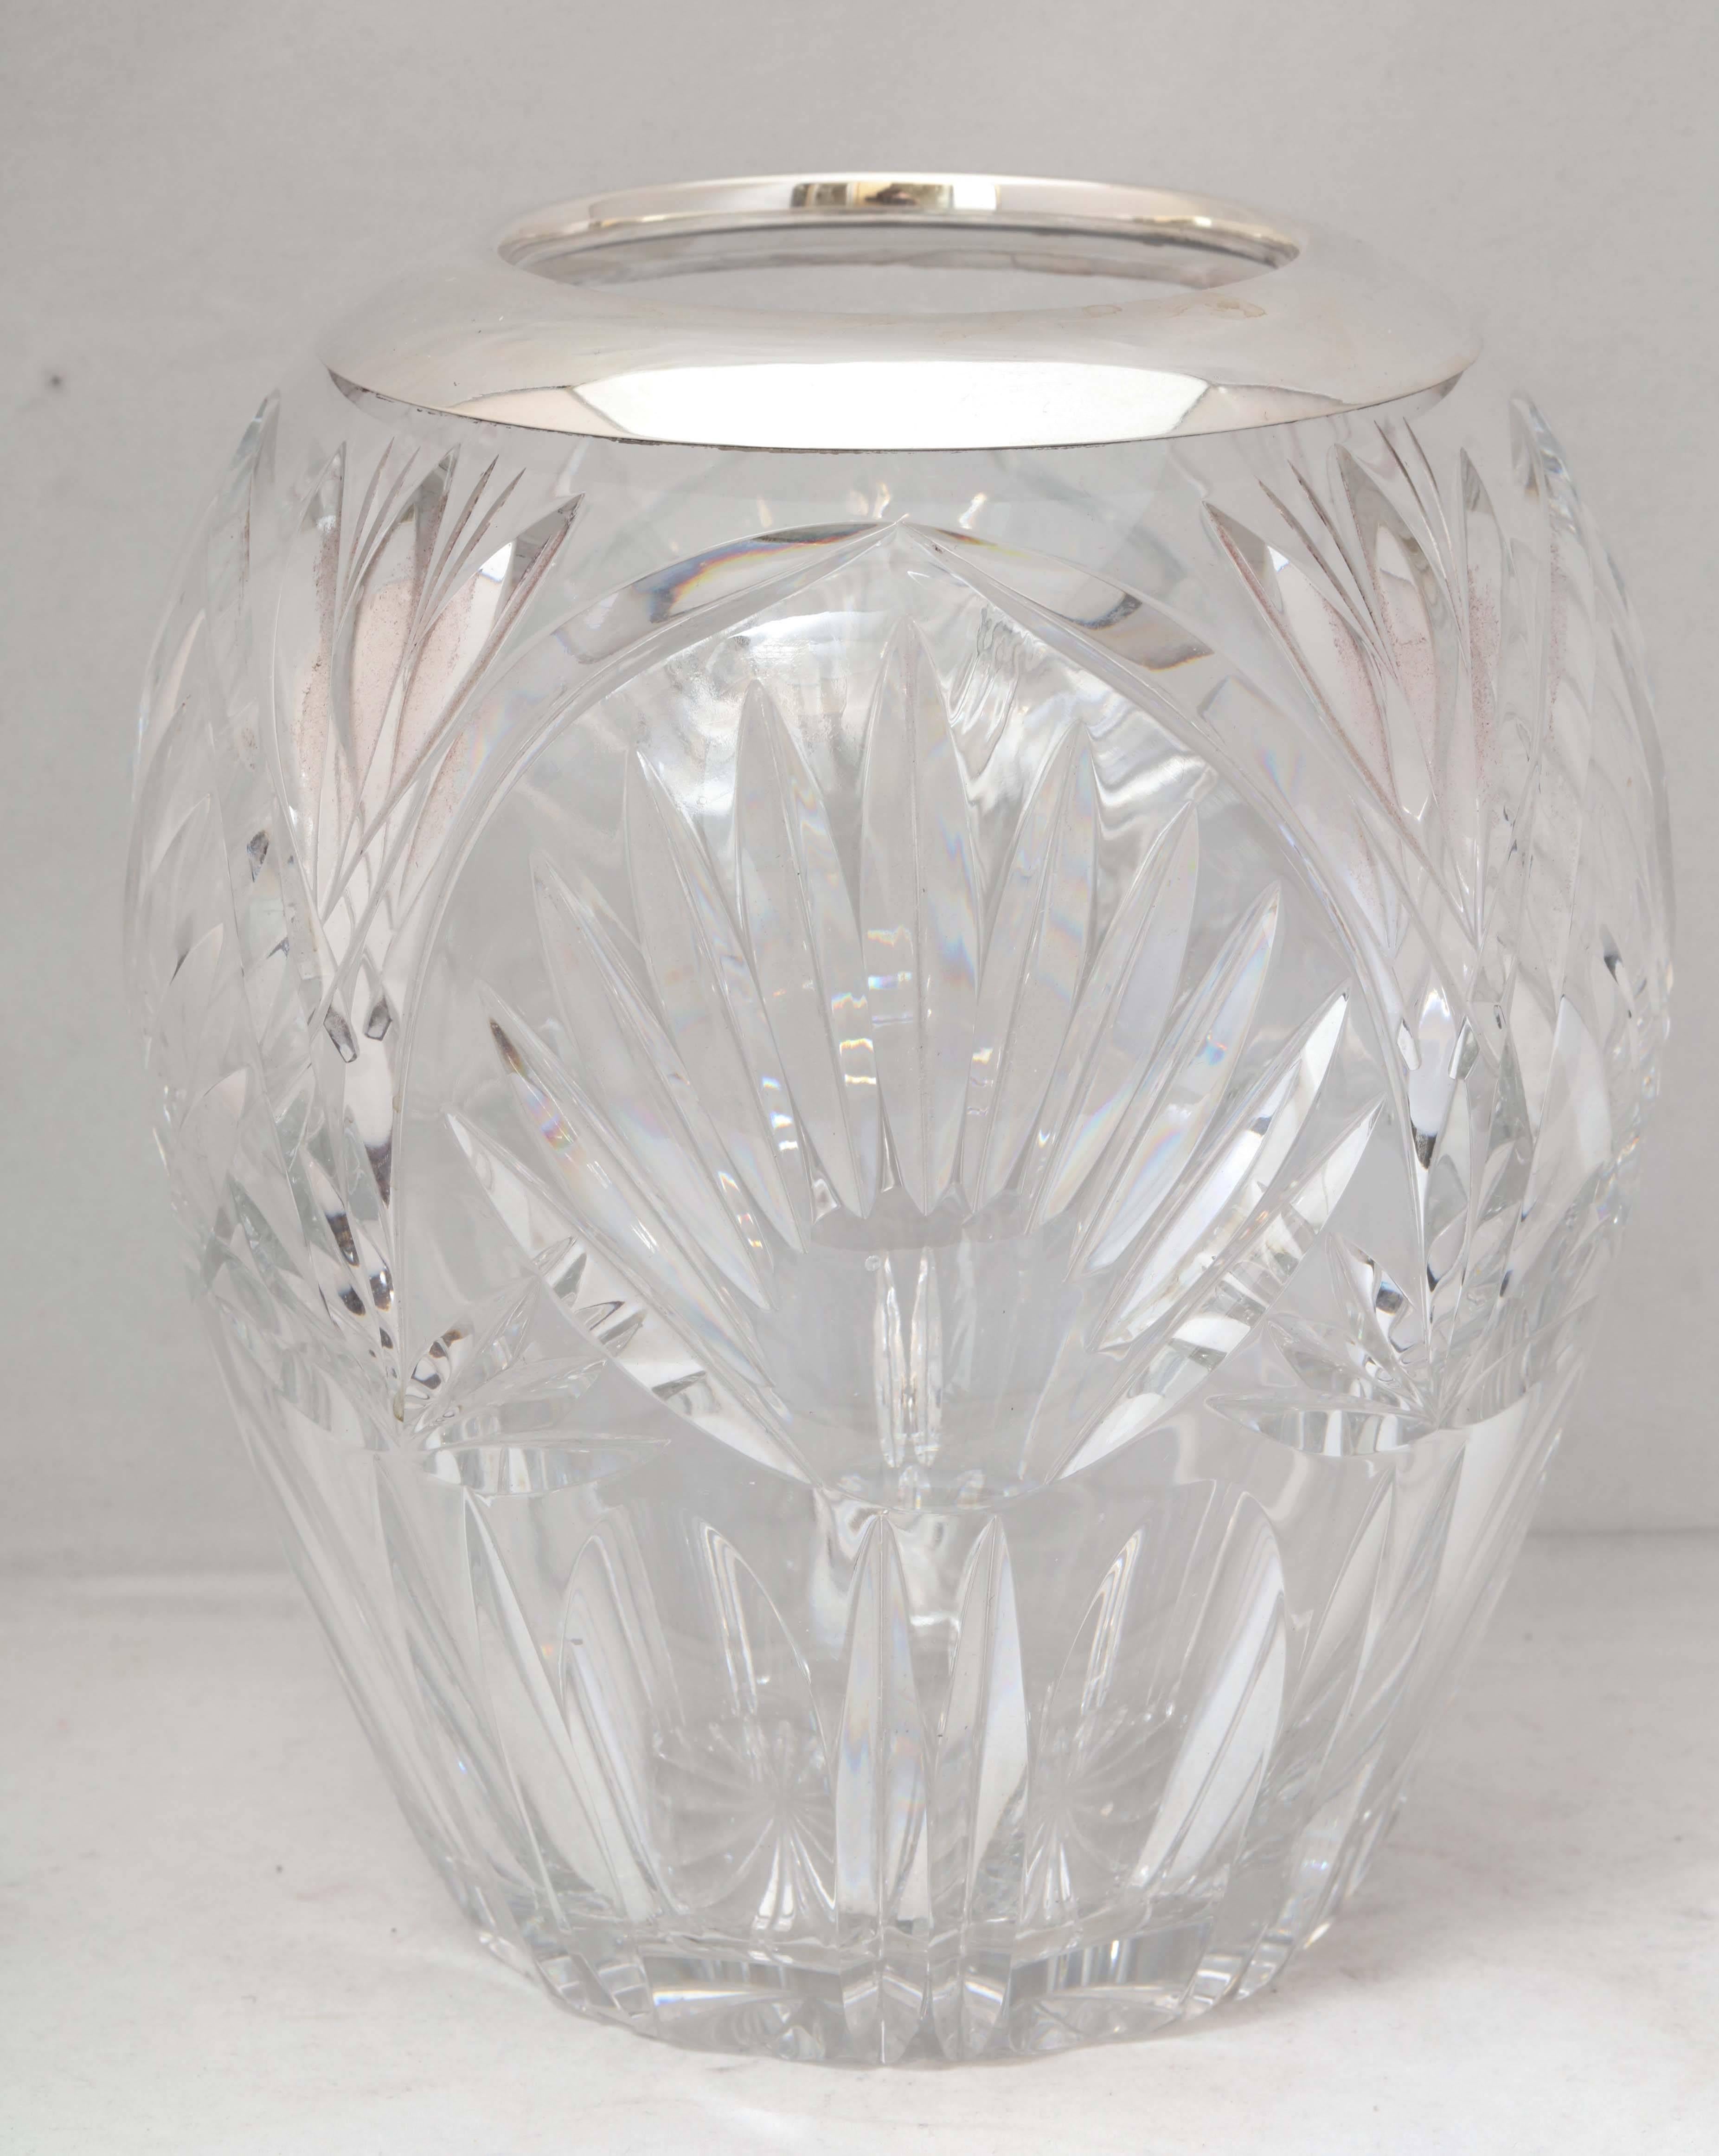 Art Deco, sterling silver-mounted, cut crystal vase, Germany, circa 1930s, Gayer & Krauss - makers. Measures: 8